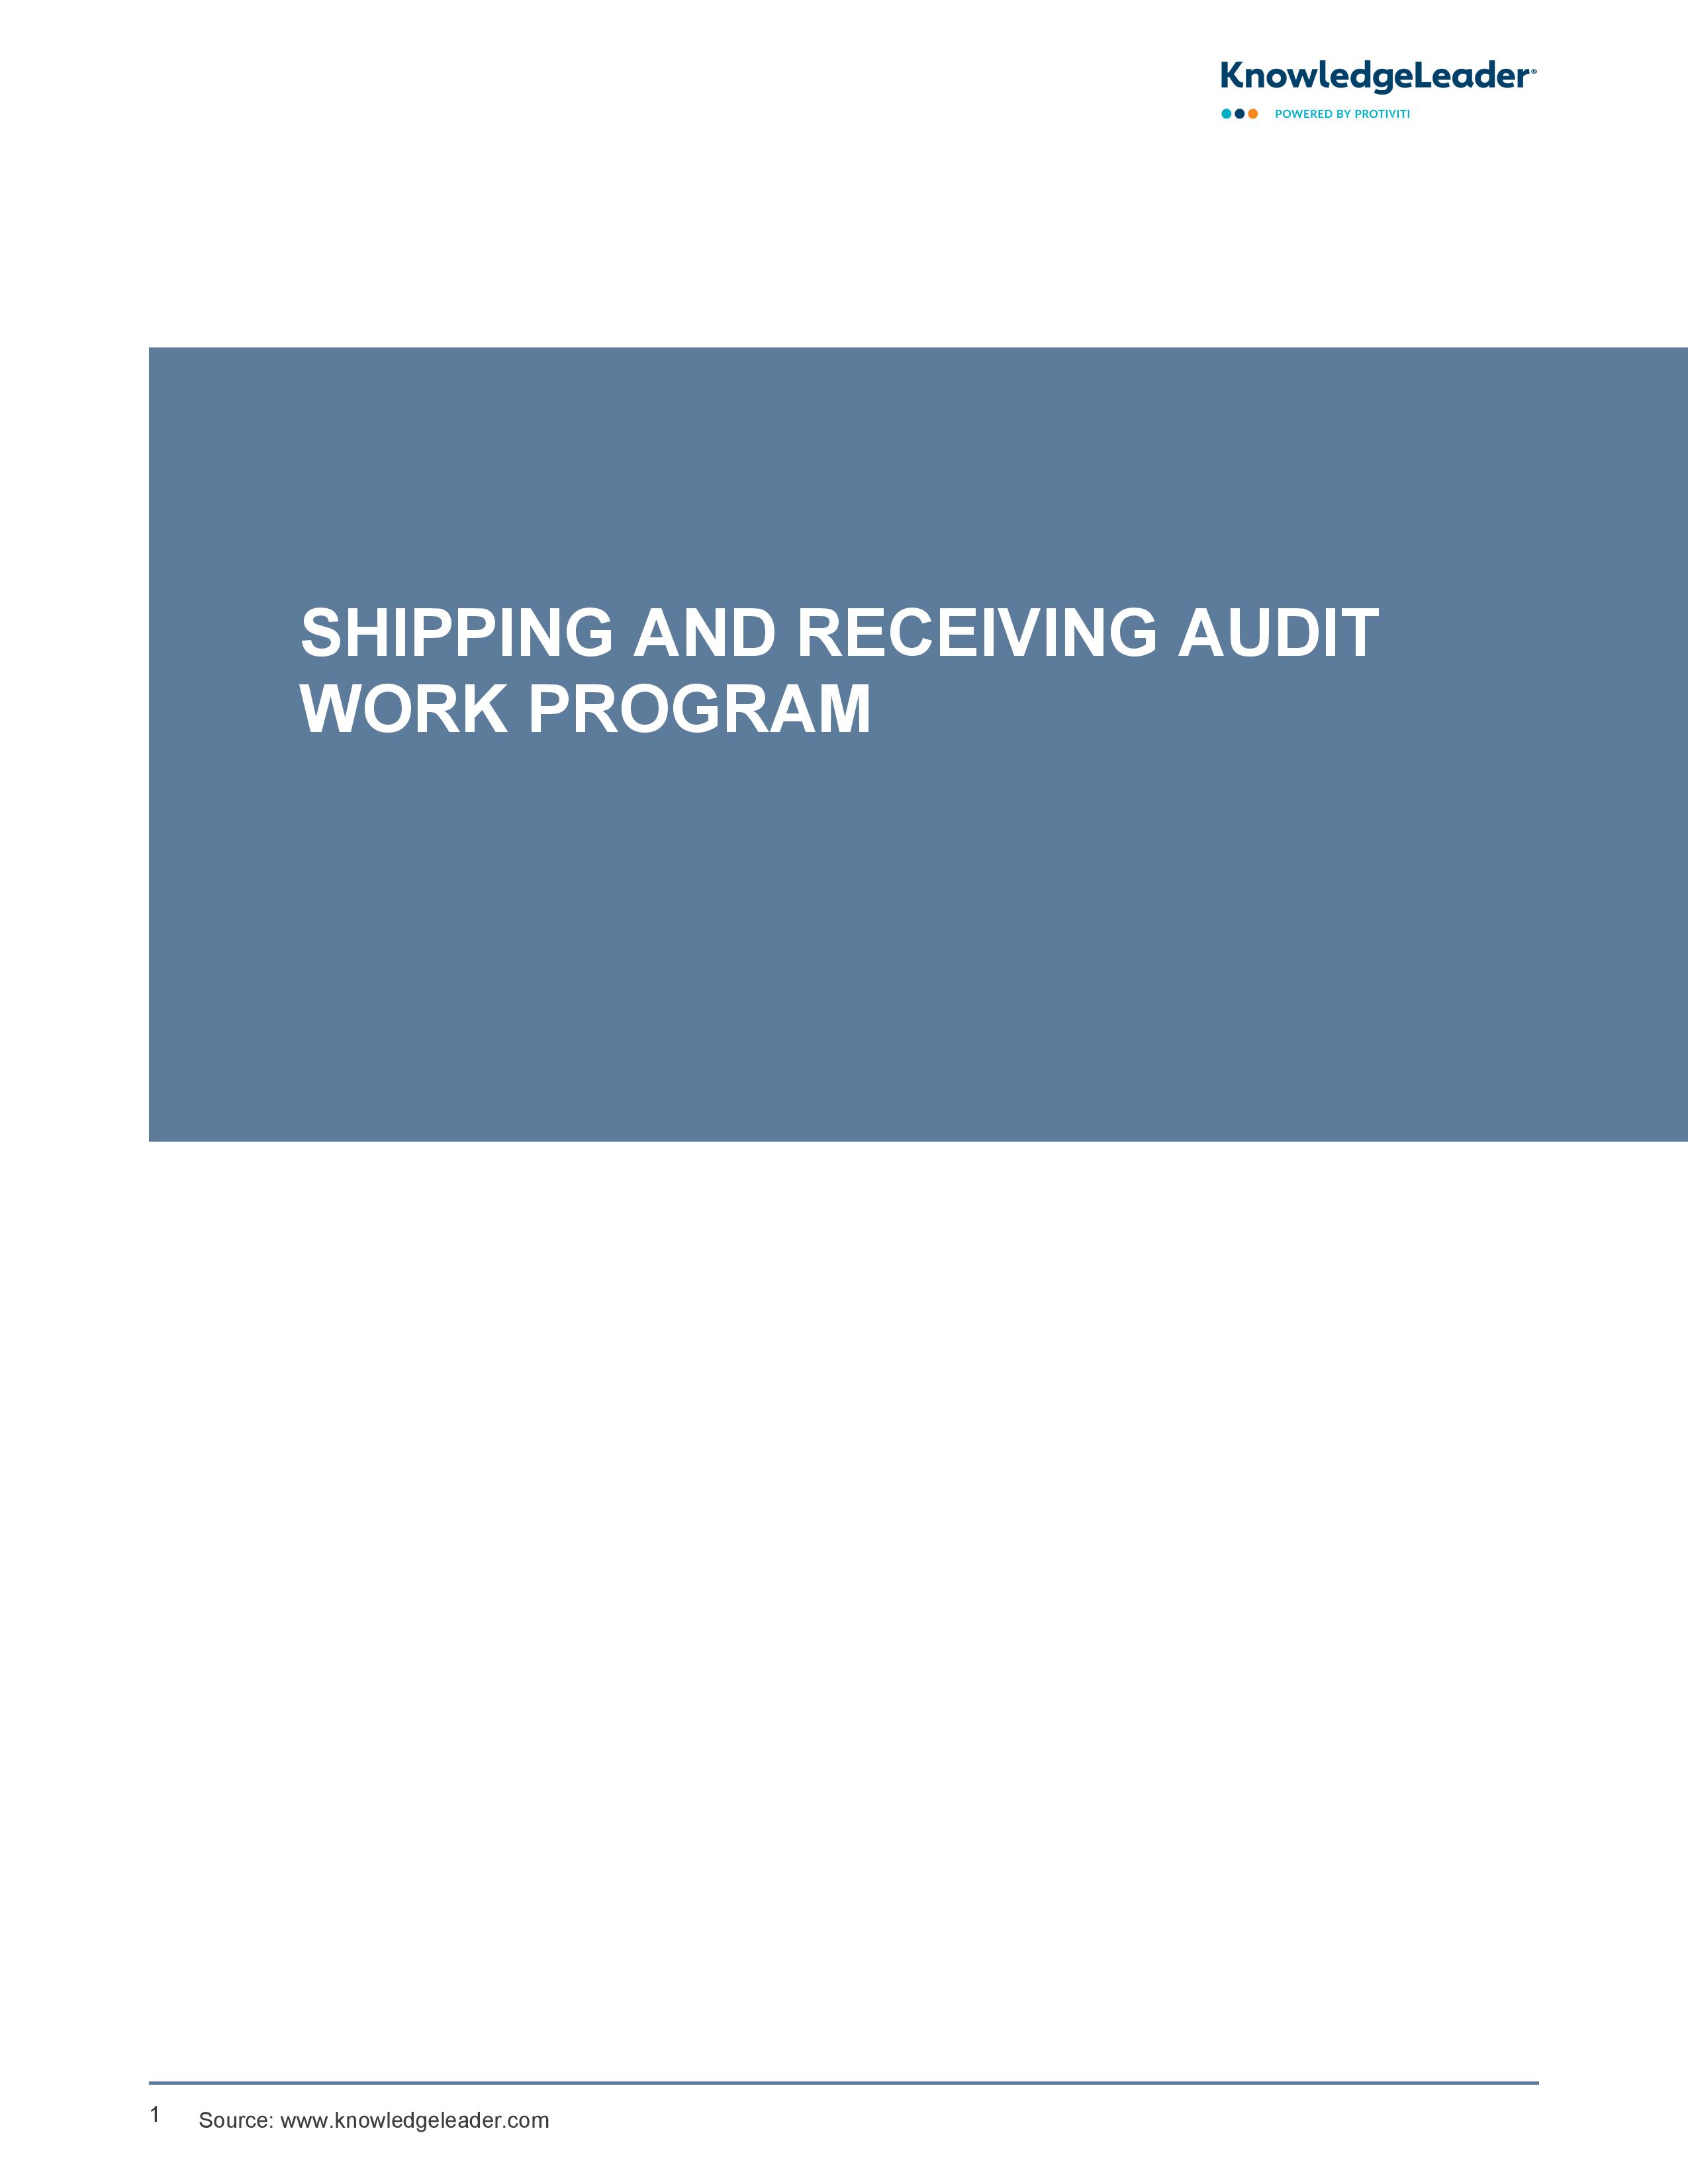 screenshot of the first page of Shipping and Receiving Audit Work Program